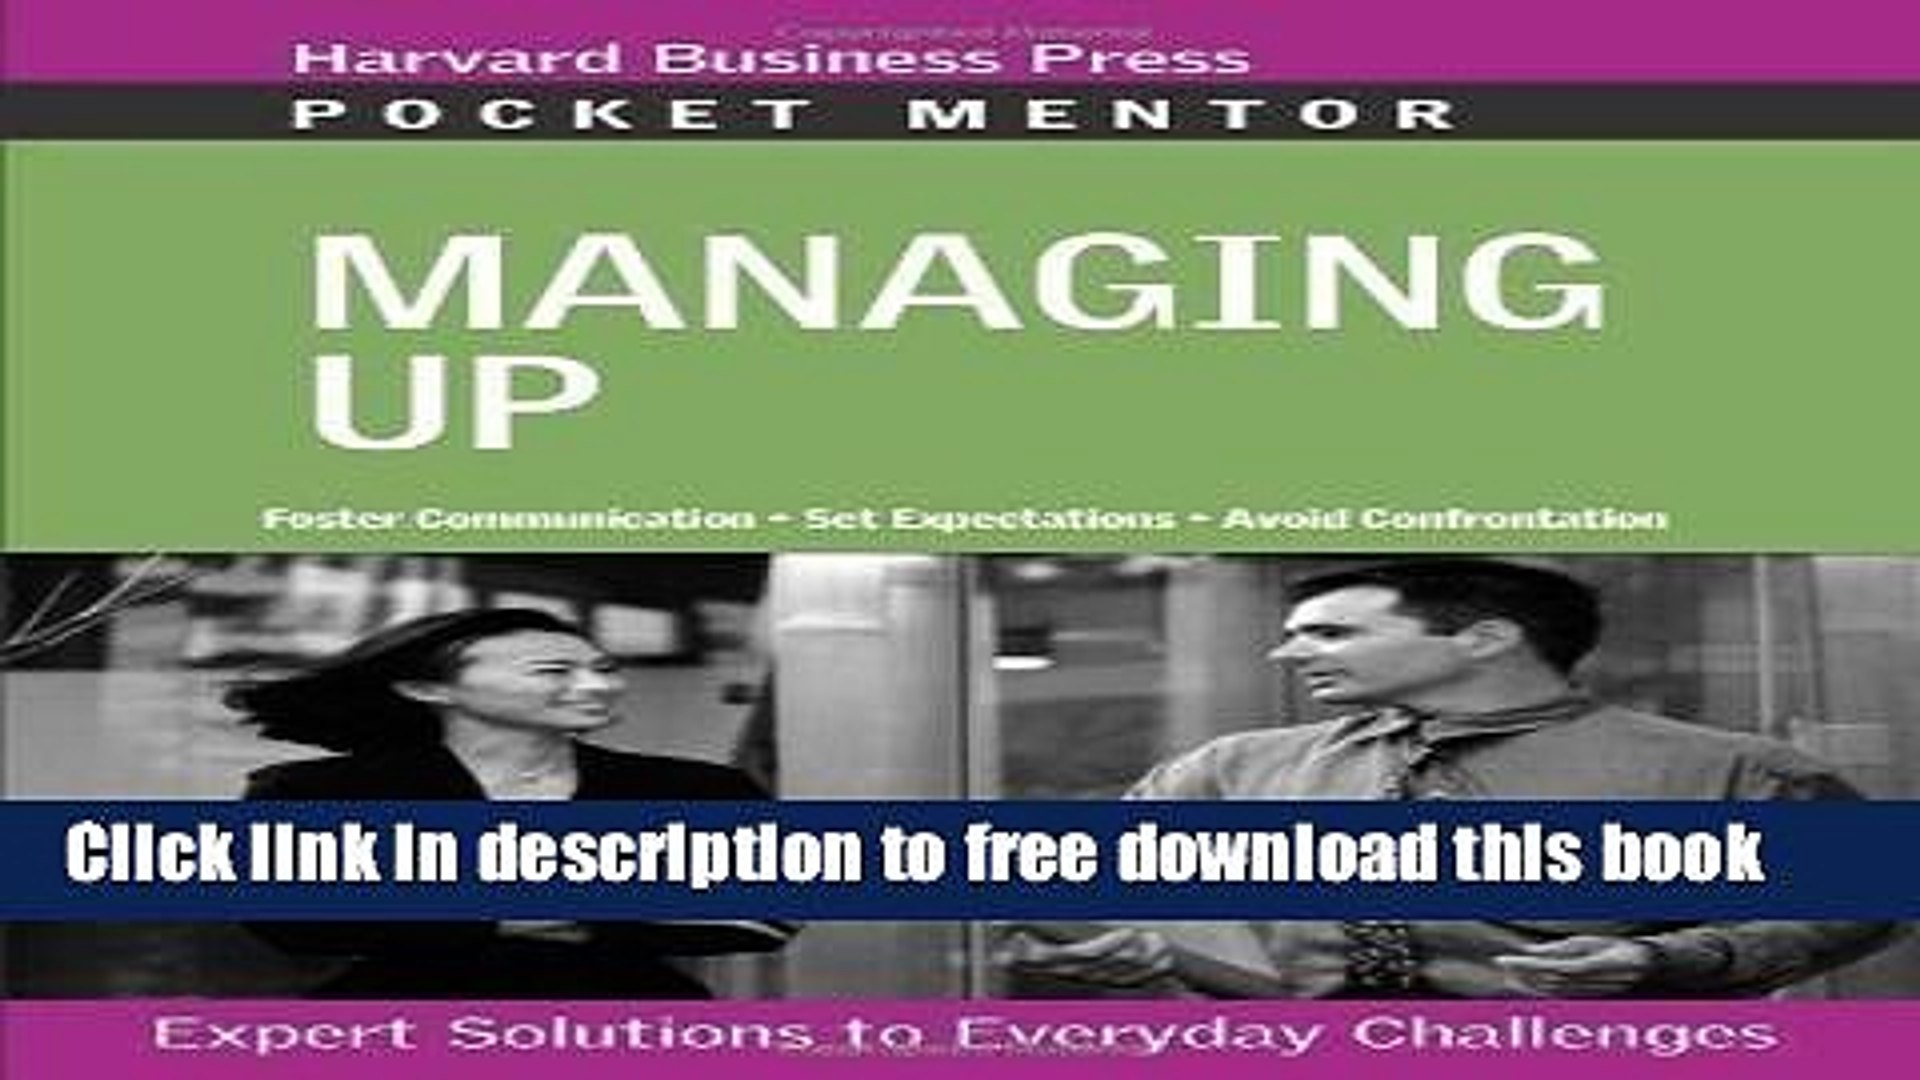 Download] Managing Up: Expert Solutions to Everyday Challenges (Harvard  Pocket Mentor Series) by - video dailymotion